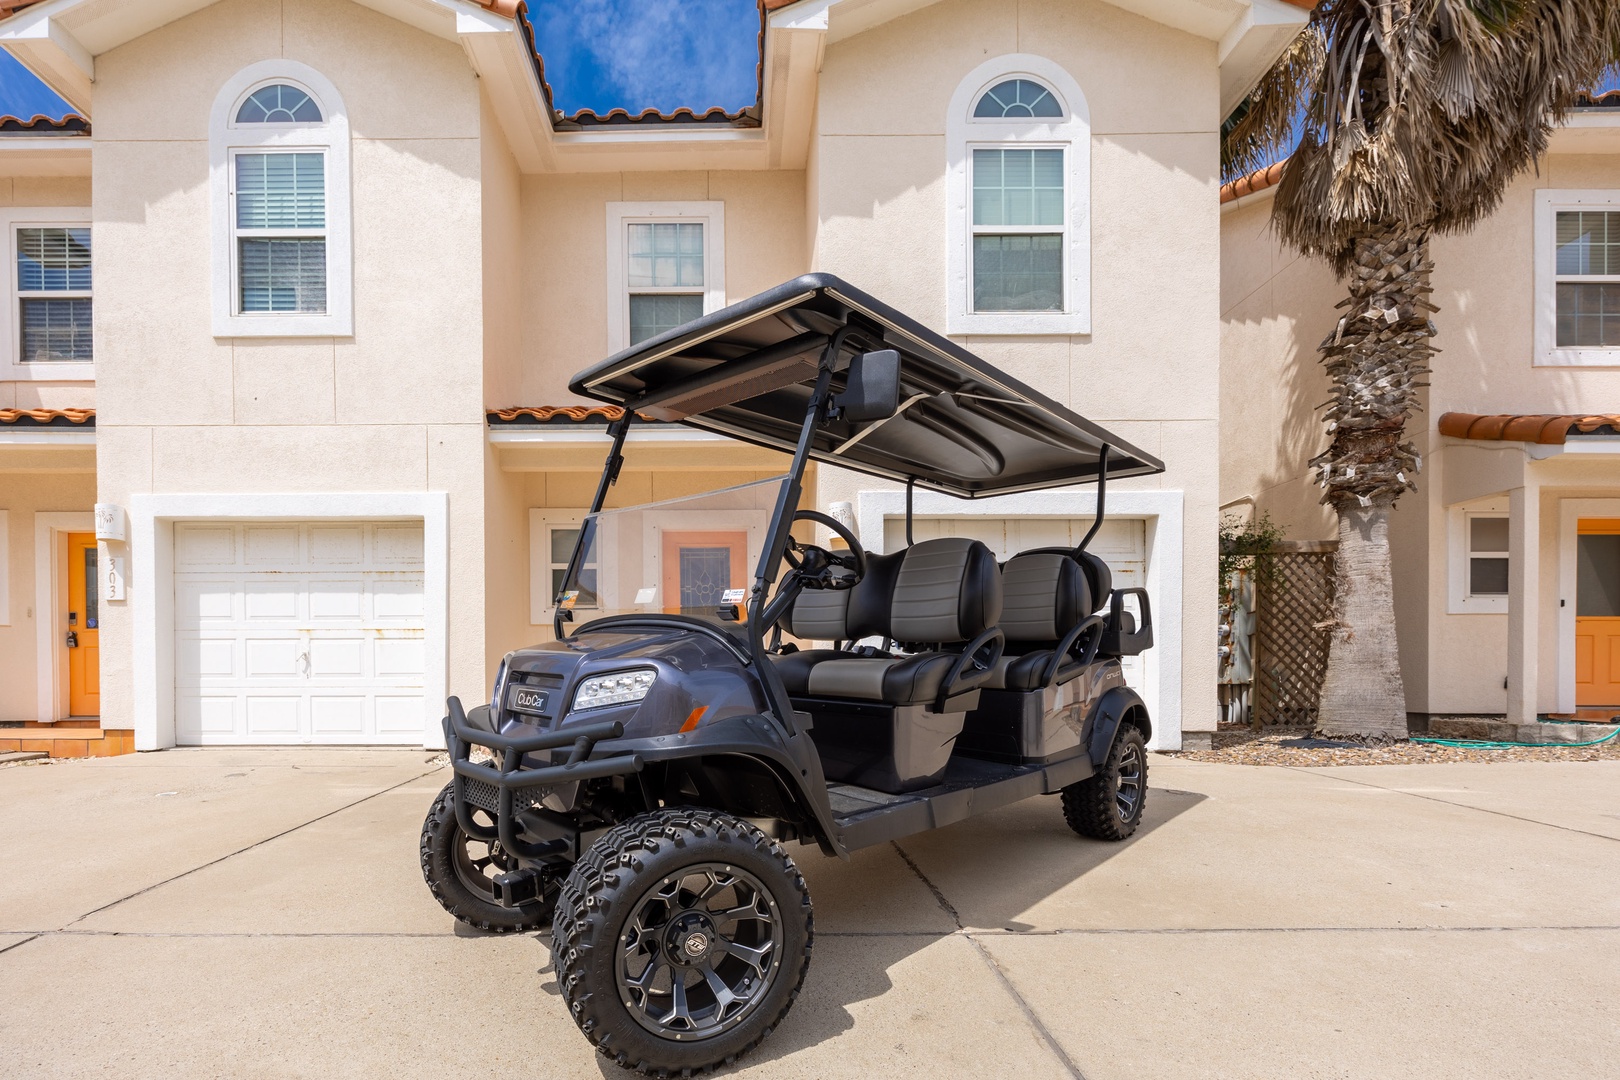 Cruise around the area with ease on the golf cart